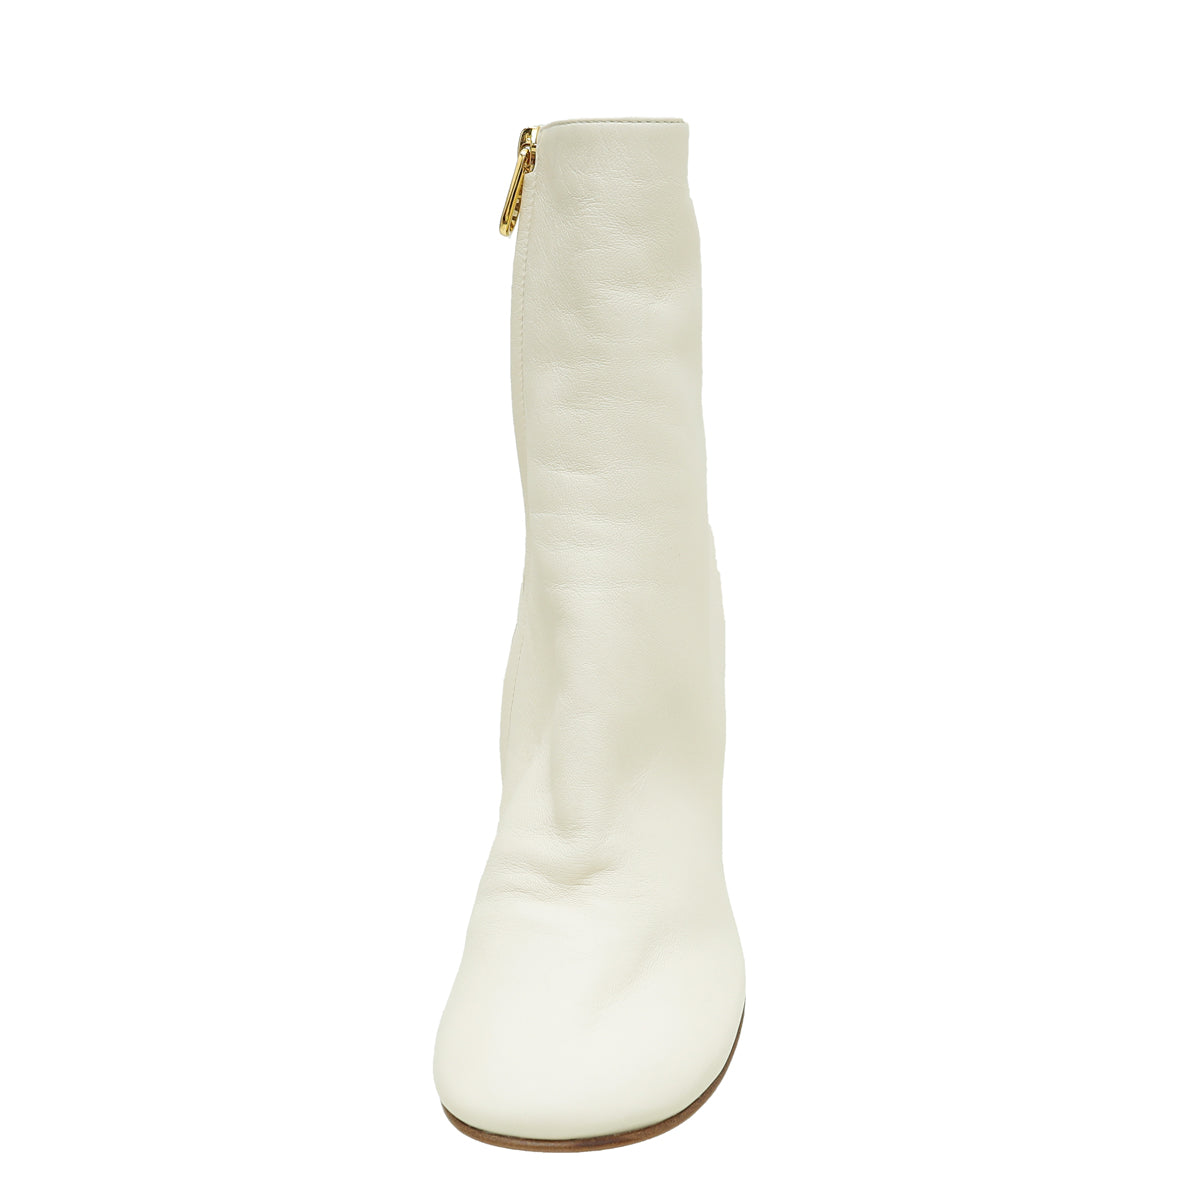 Fendi Cream First High-Heeled Ankle Boots 37